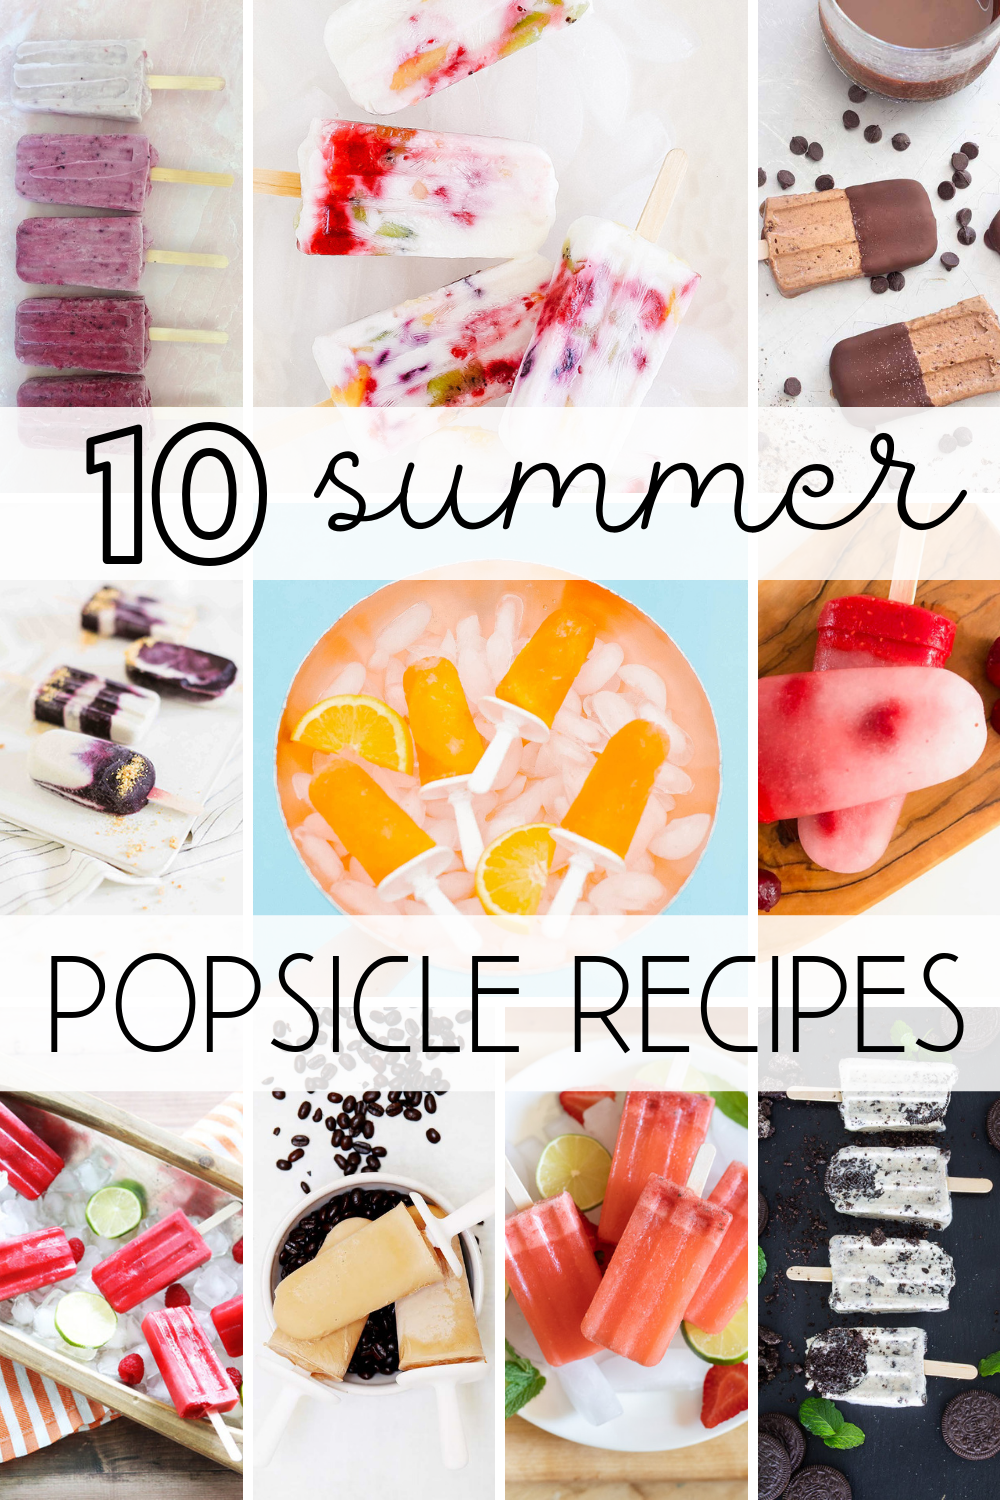 10 summer popsicles recipes poster.